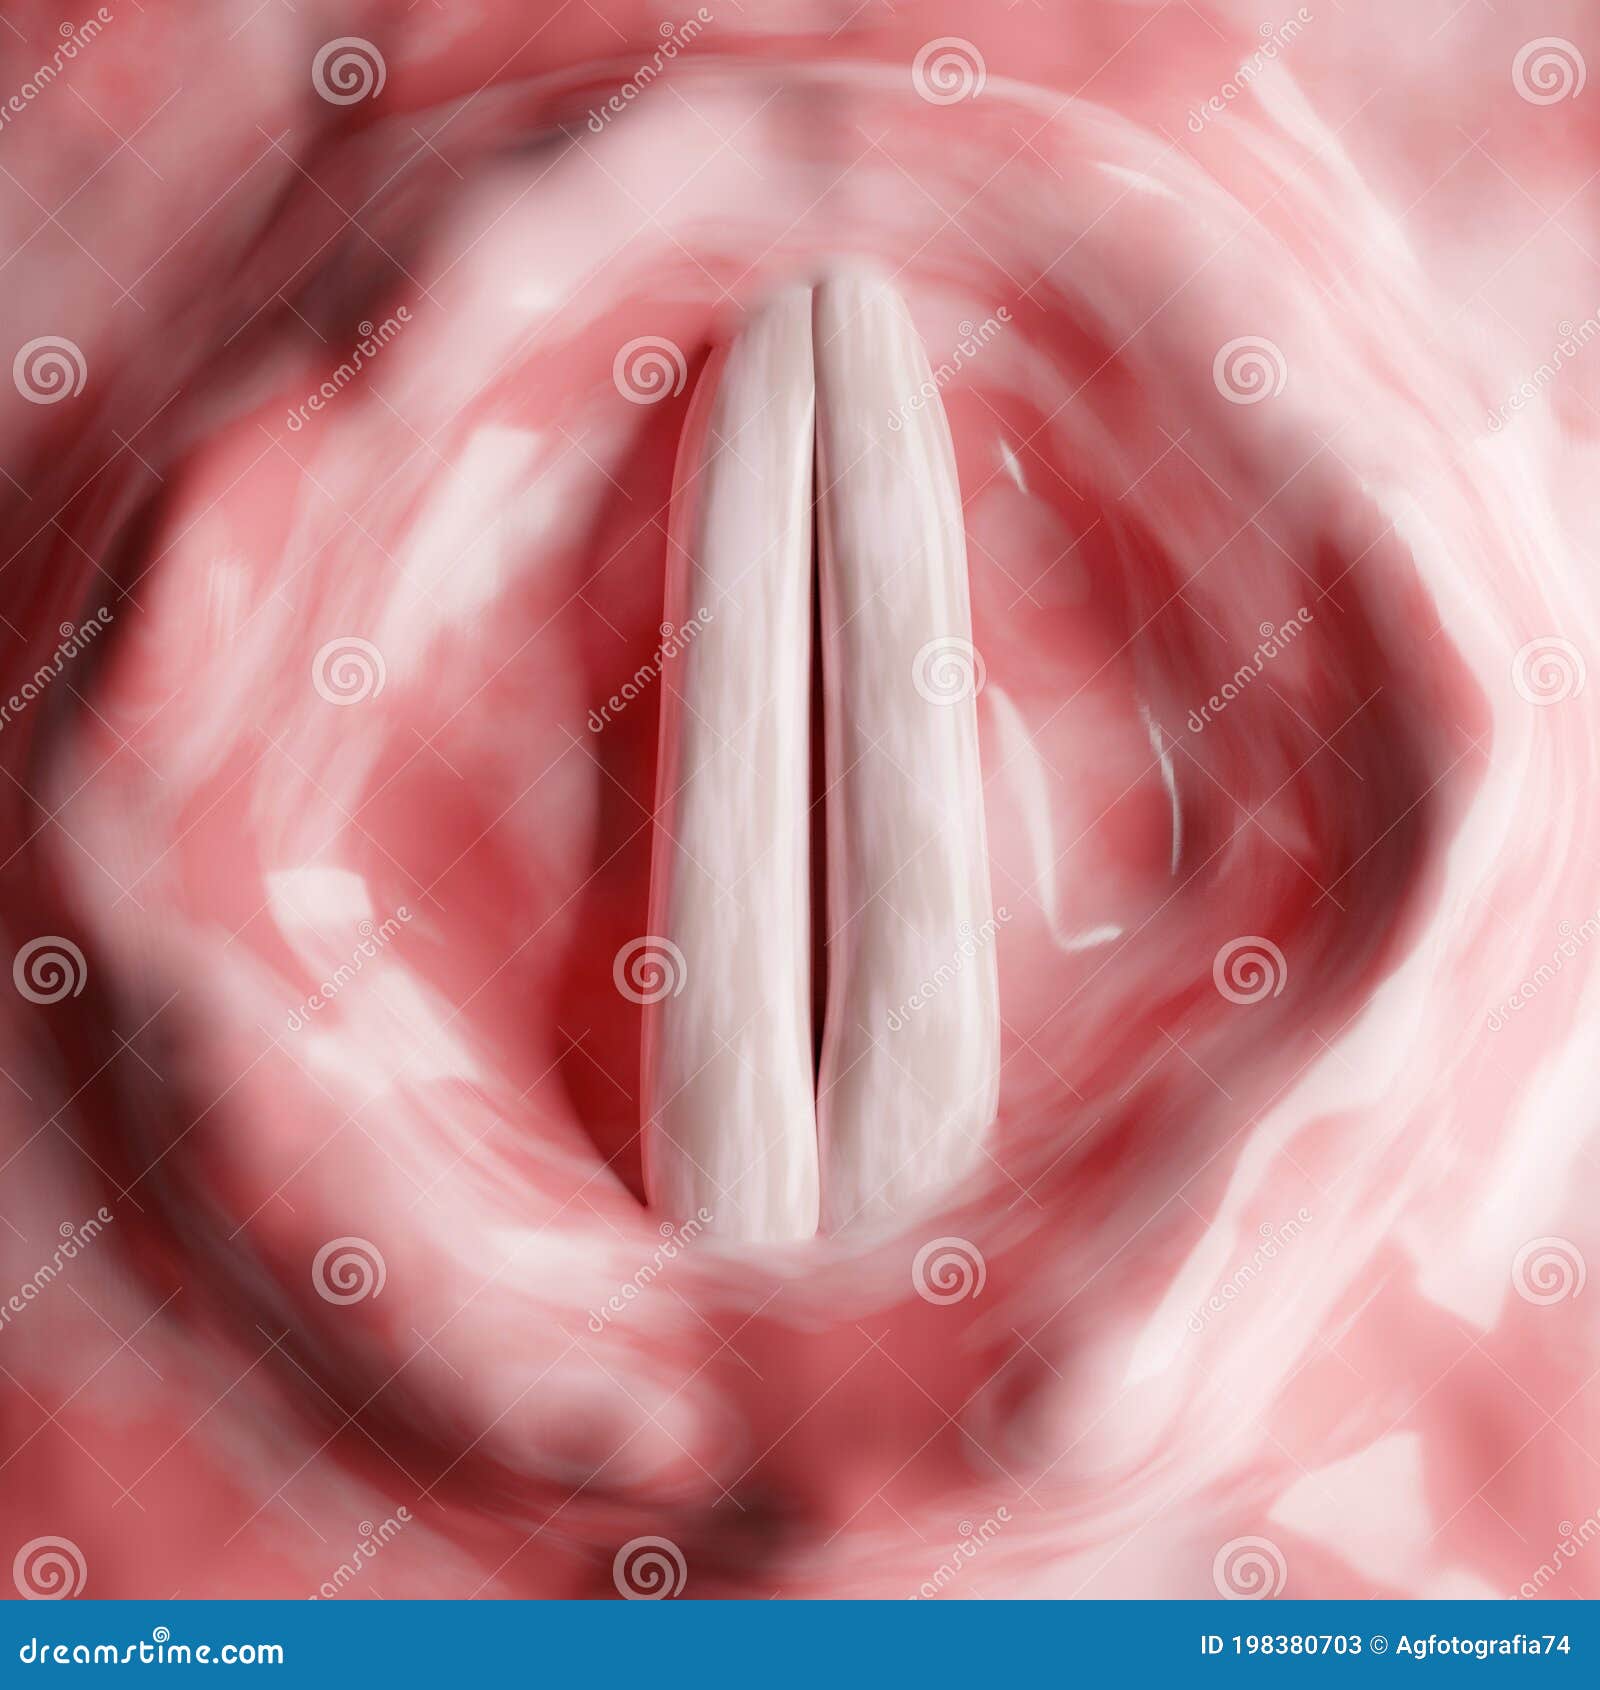 the vocal folds, known as vocal cords, are two folds of muscle and mucosa that extend horizontally in the larynx